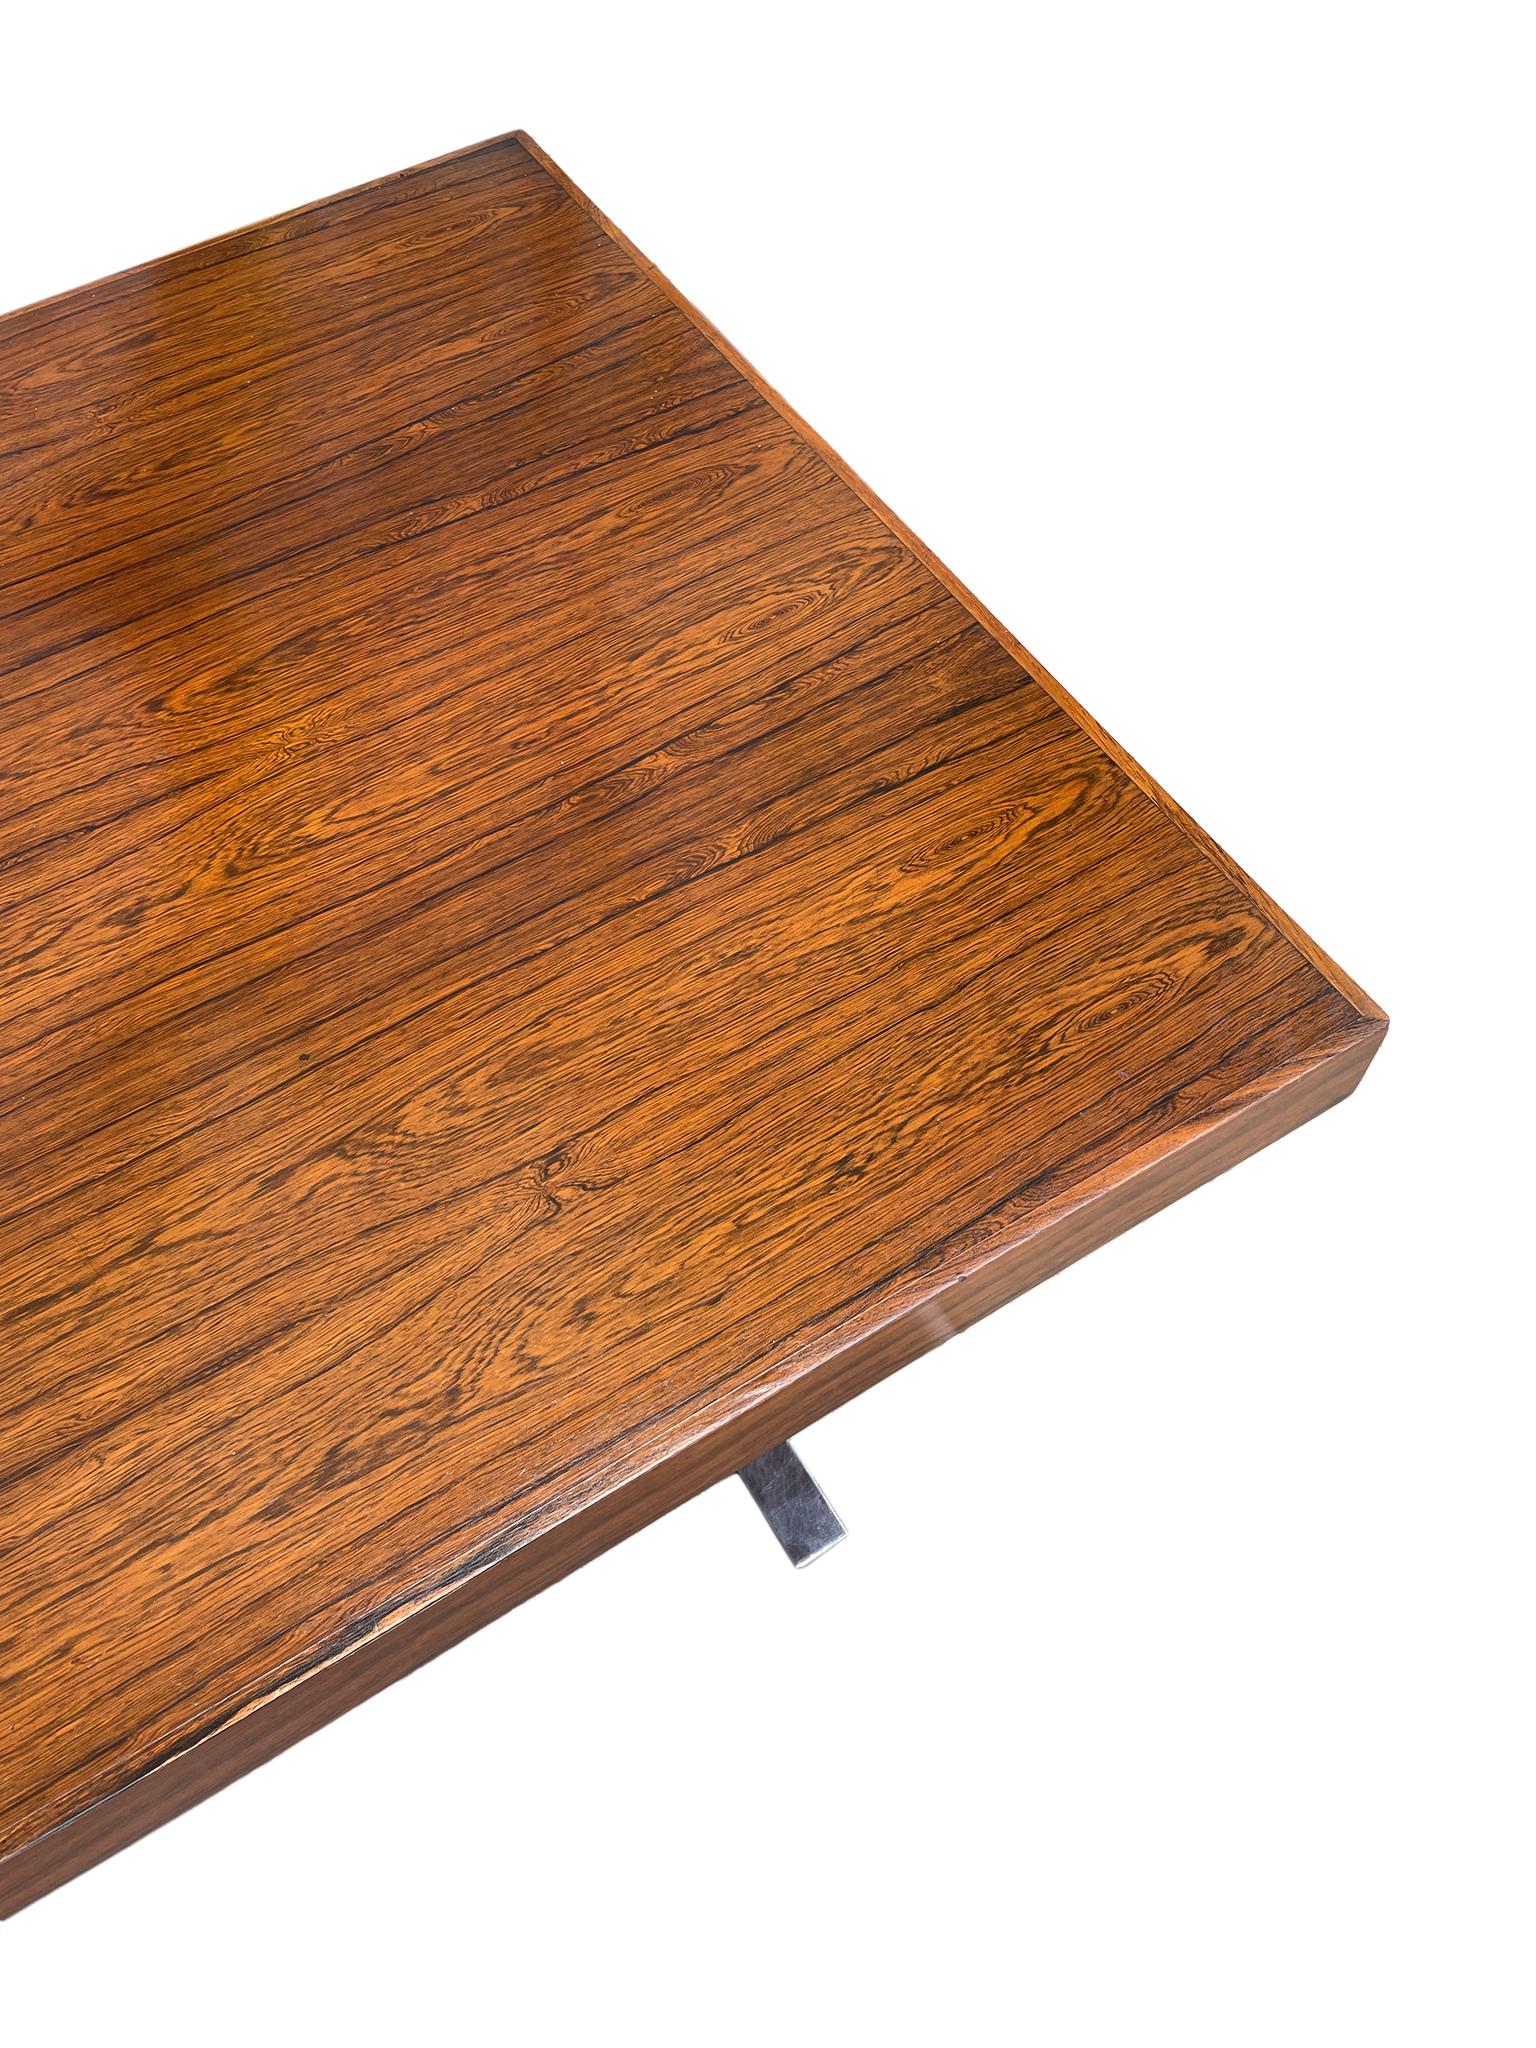 20th Century Stunning MidCentury Minimalist Rosewood Dining Table 1 Leaf by Georg Petersens For Sale